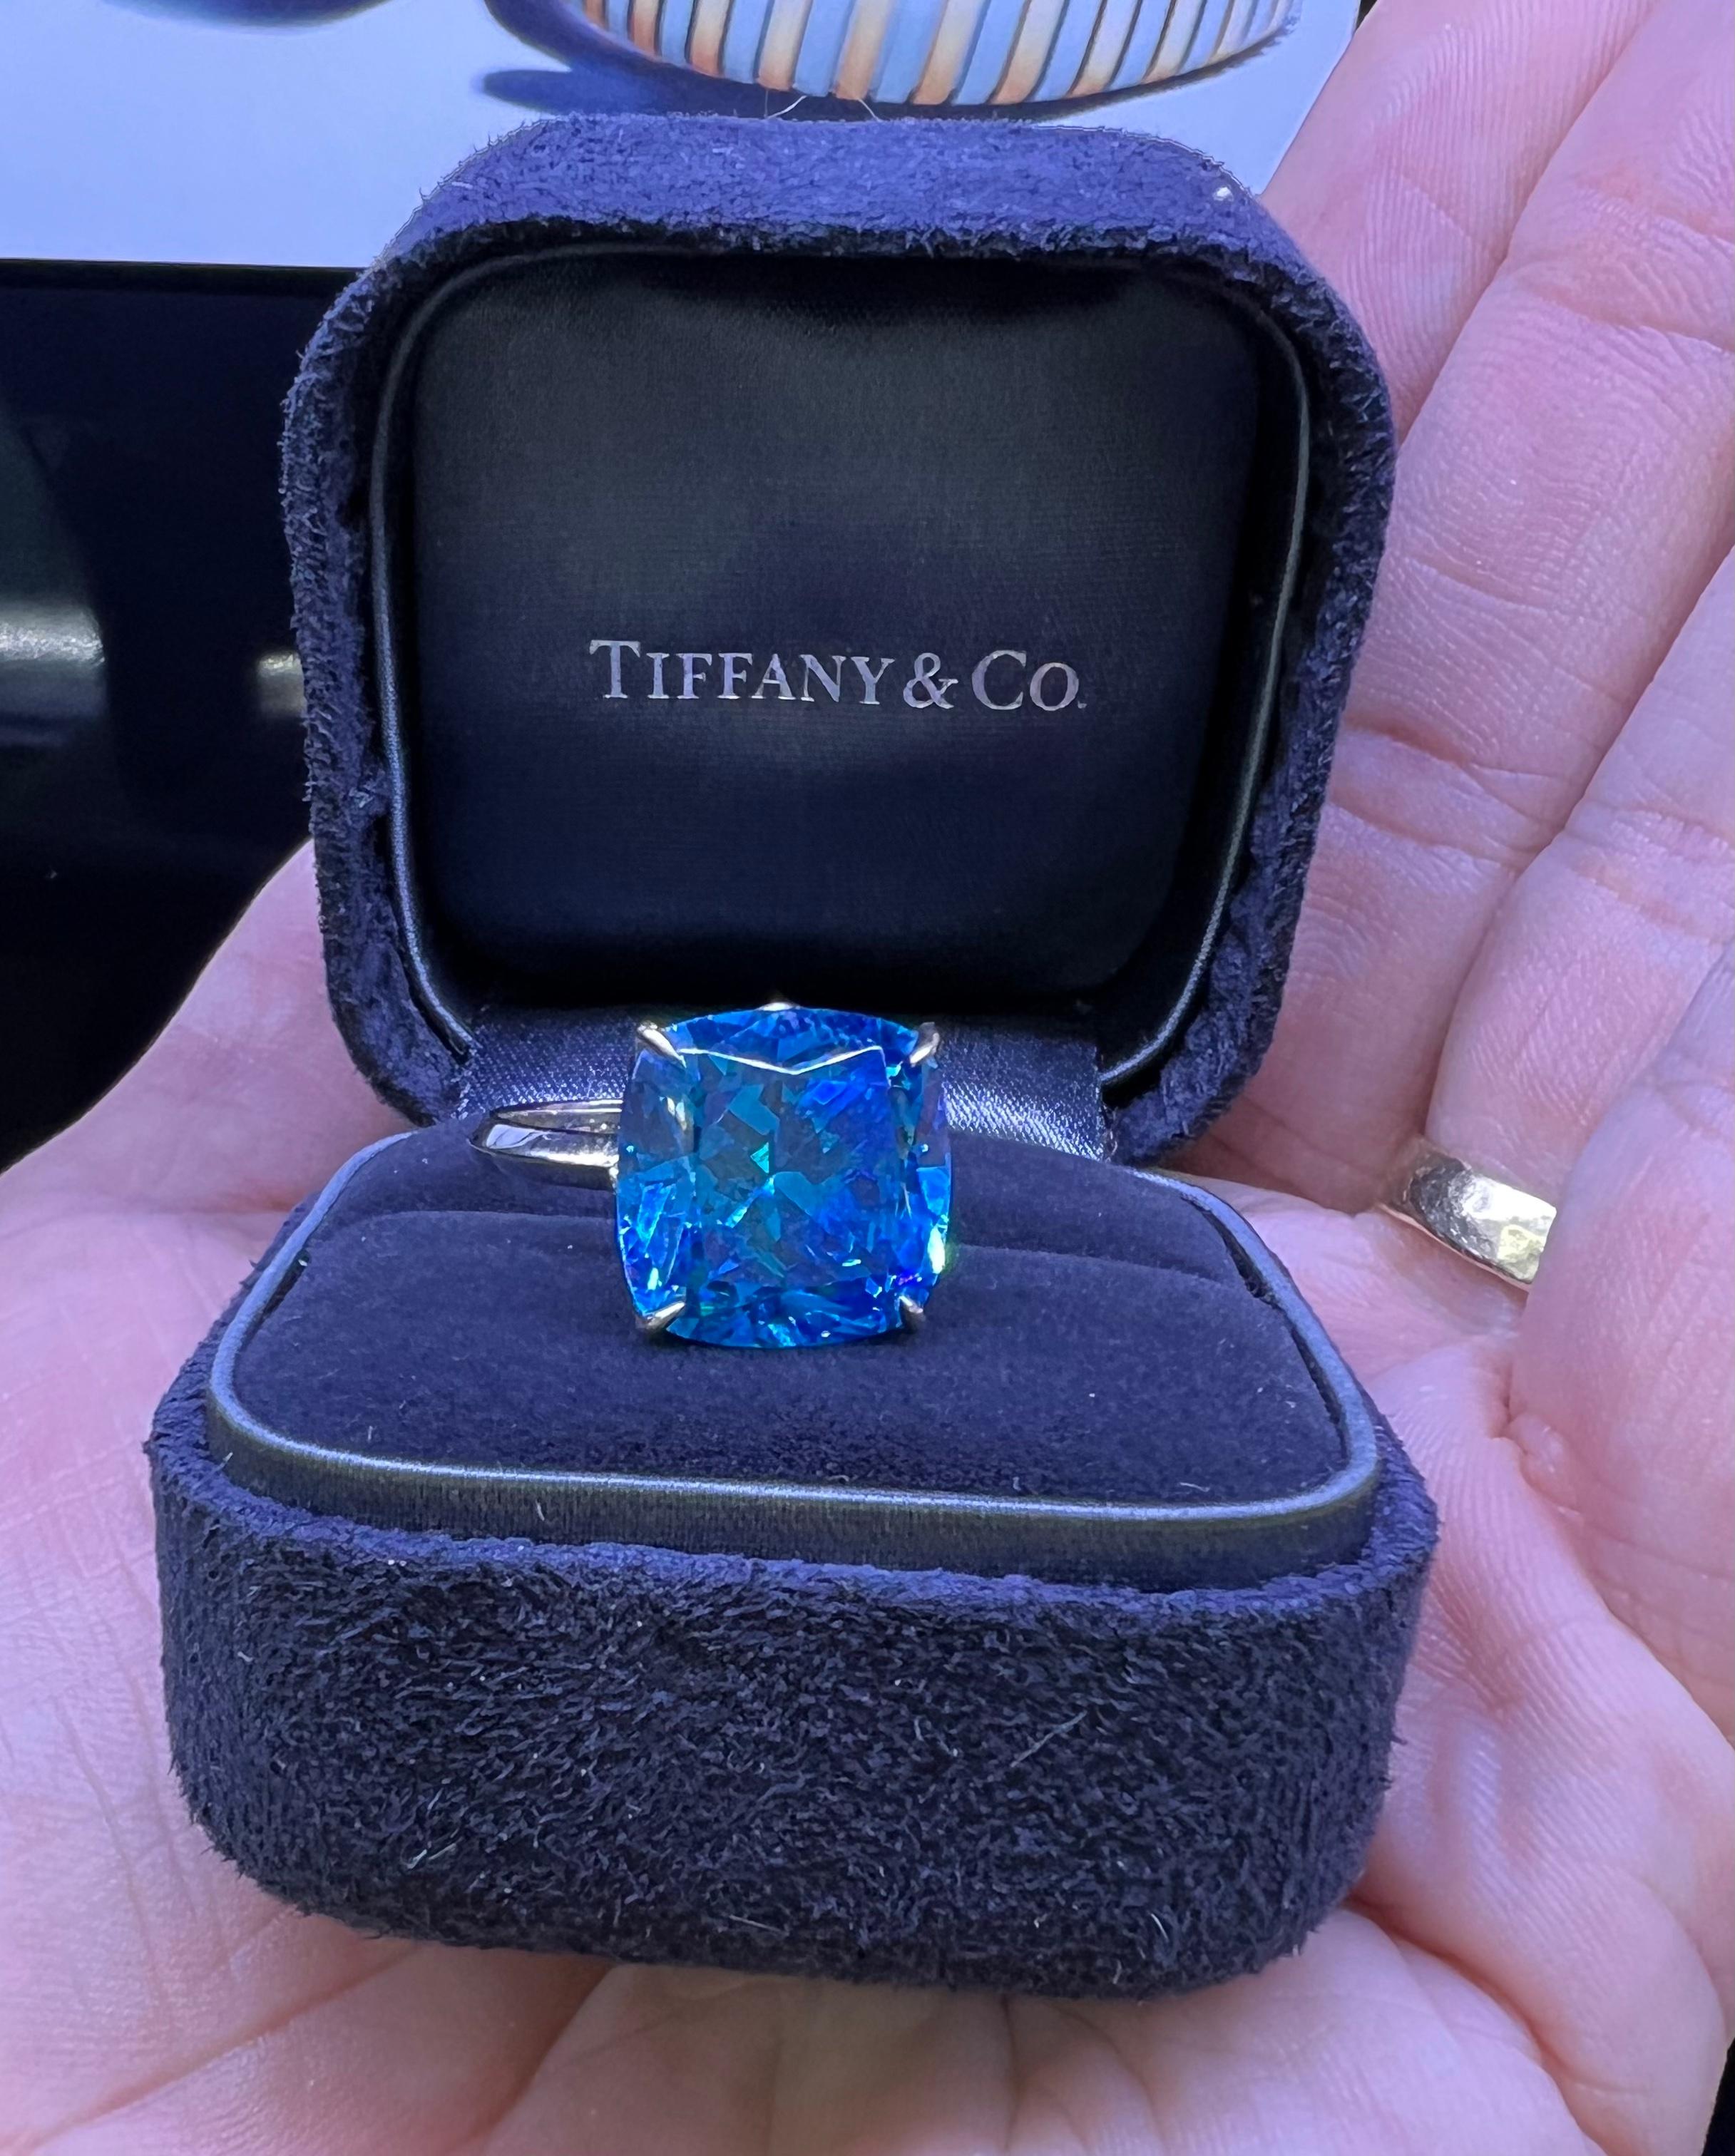 Contemporary Tiffany & Co. Blue Topaz Cocktail Ring 18k White Gold